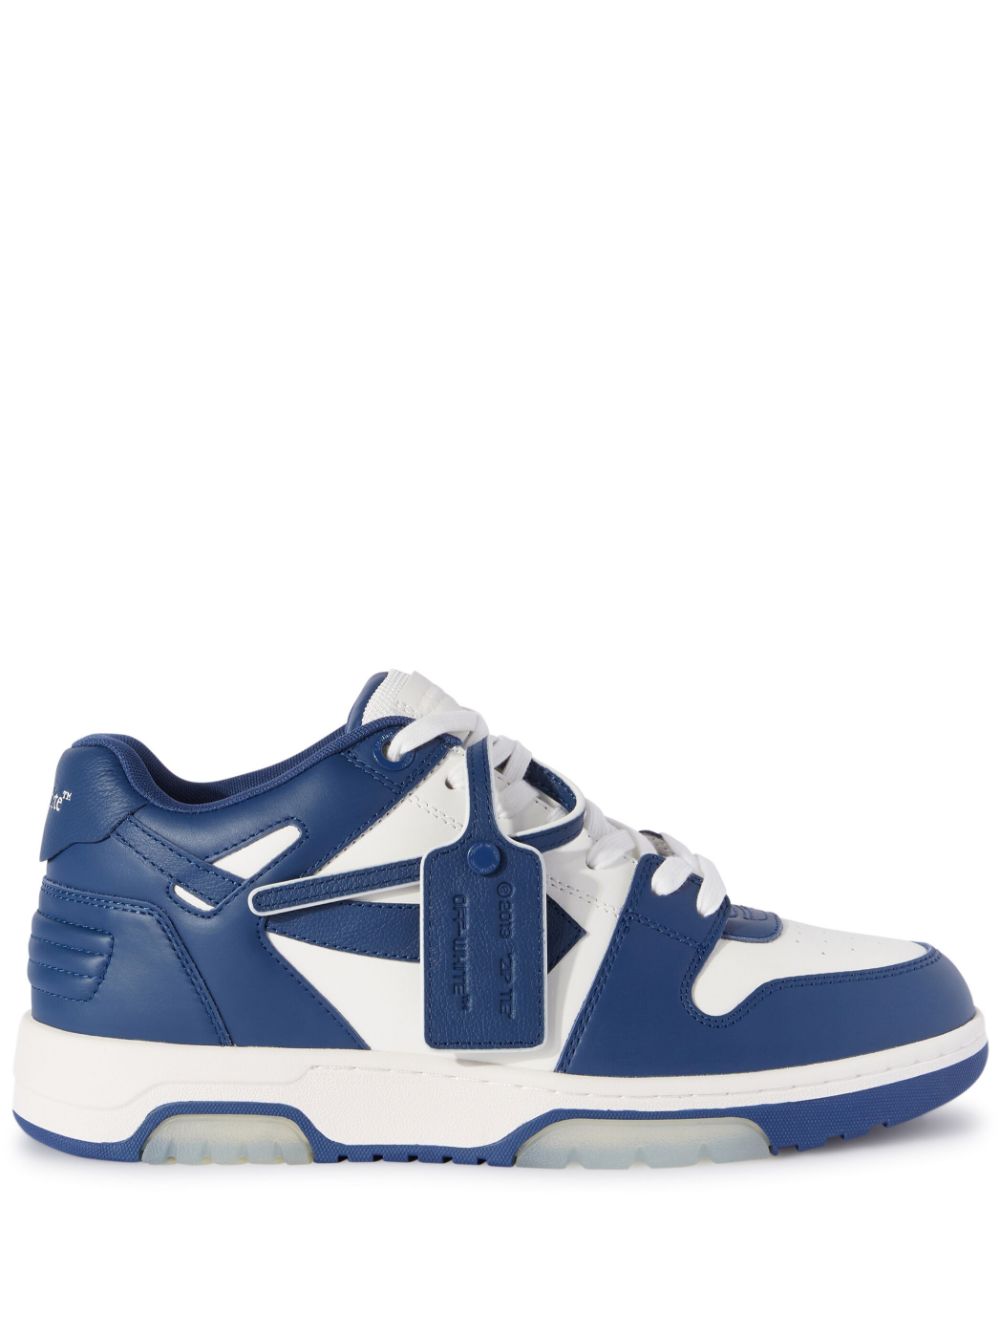 Off-White Out Of Office "Ooo" sneakers - Blue von Off-White